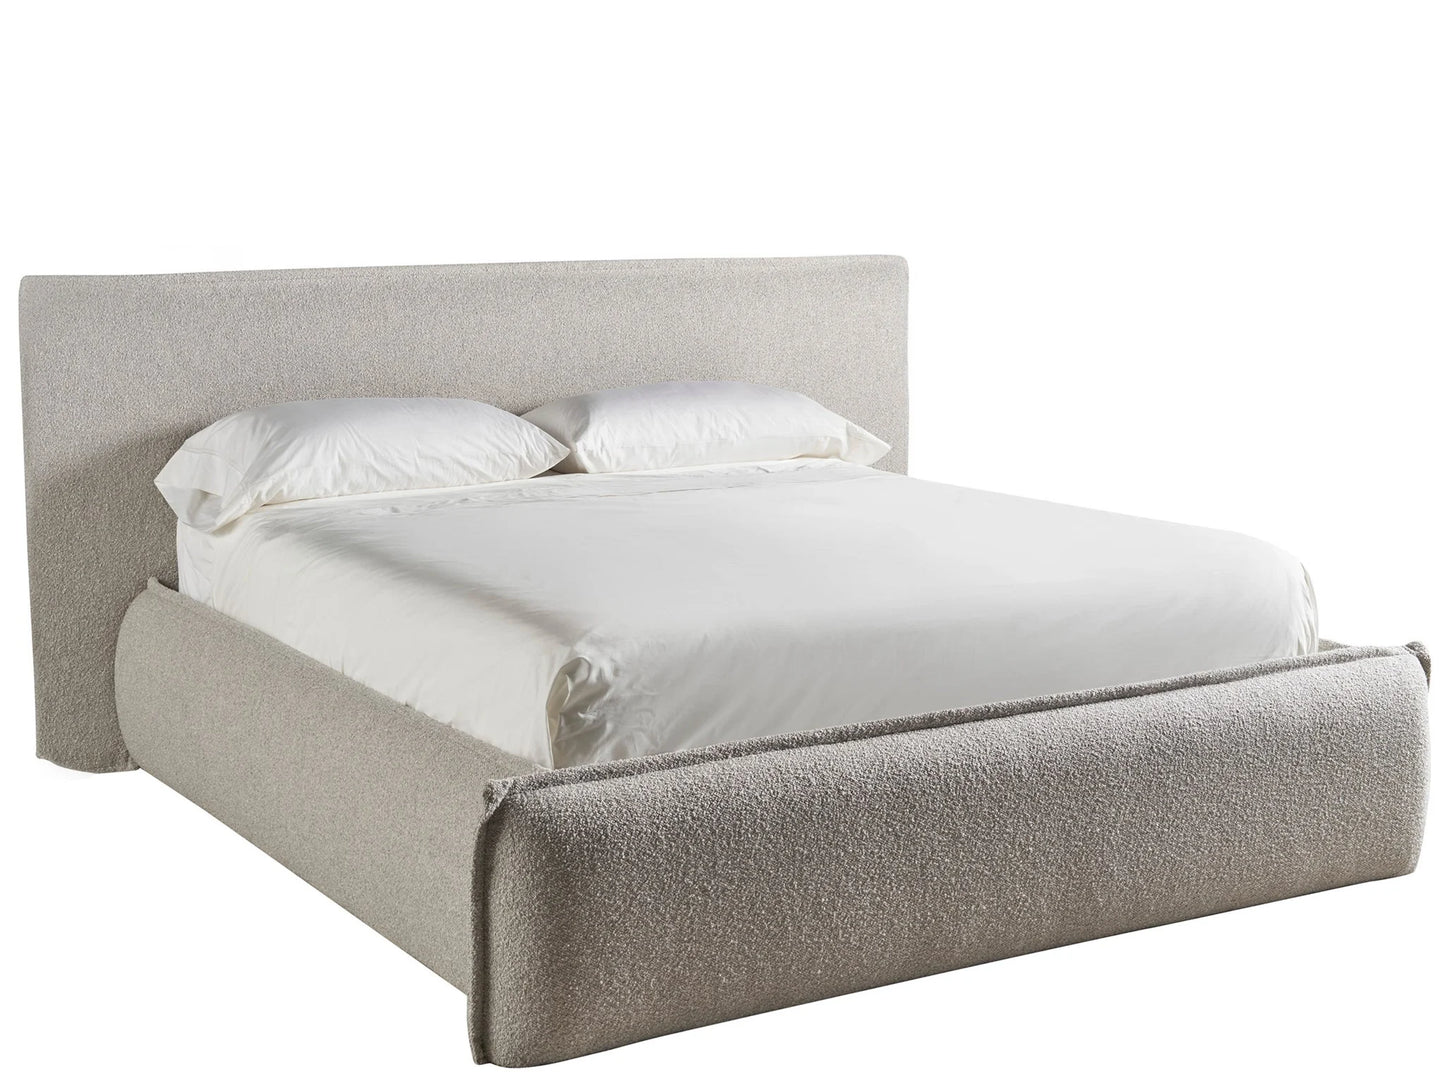 UNIVERSAL - NEW MODERN LUX UPHOLSTERED BED KING